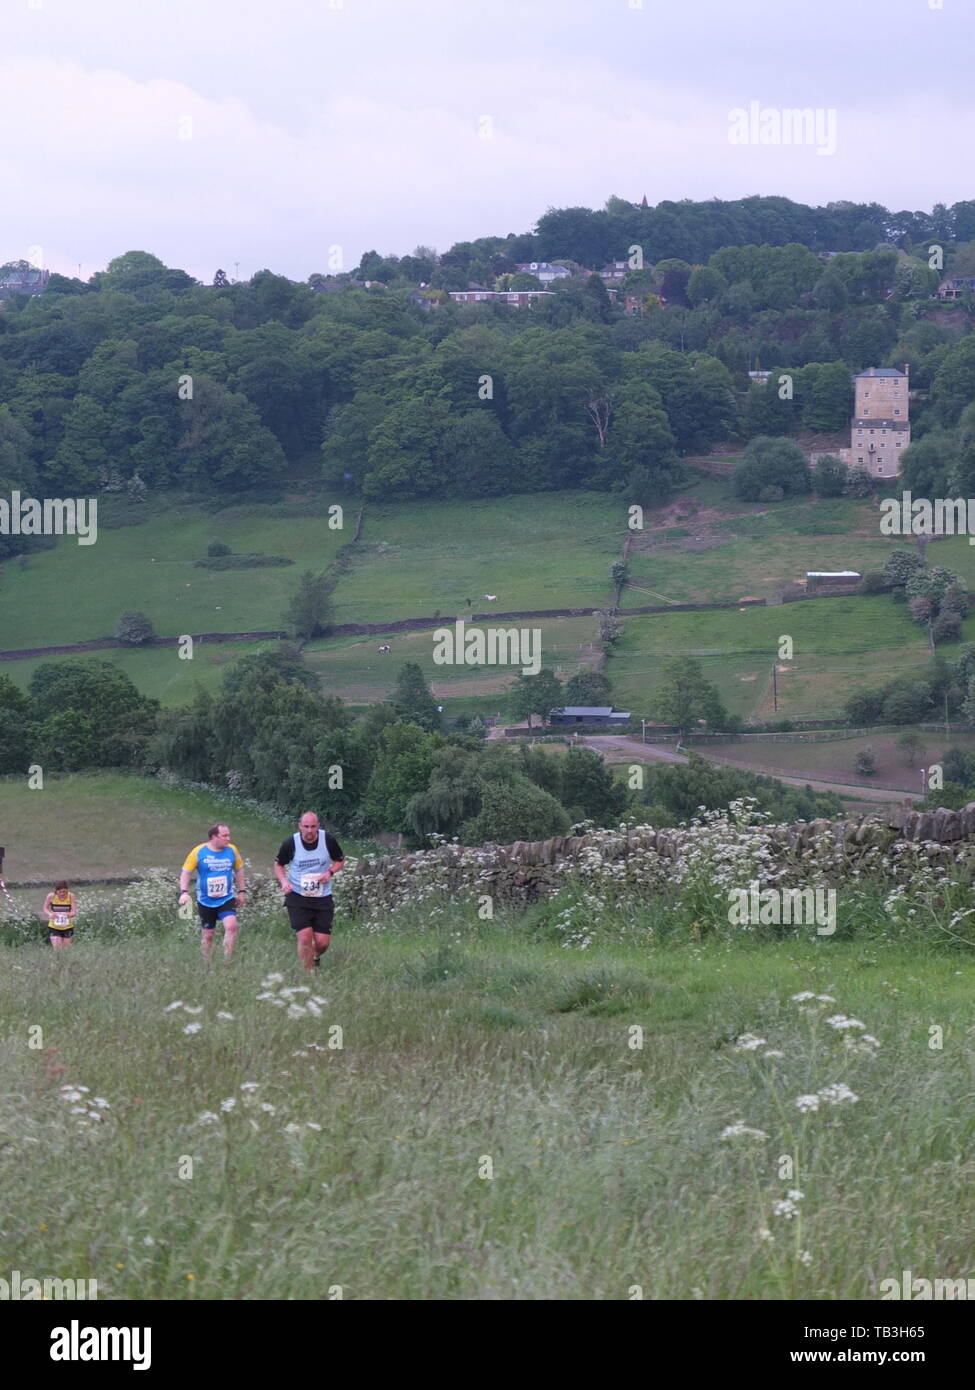 Runners in the Hallam Chase from Crosspool in Sheffield to Stannington, claimed as oldest continuously-run fell race in the world dating back to 1862. Stock Photo